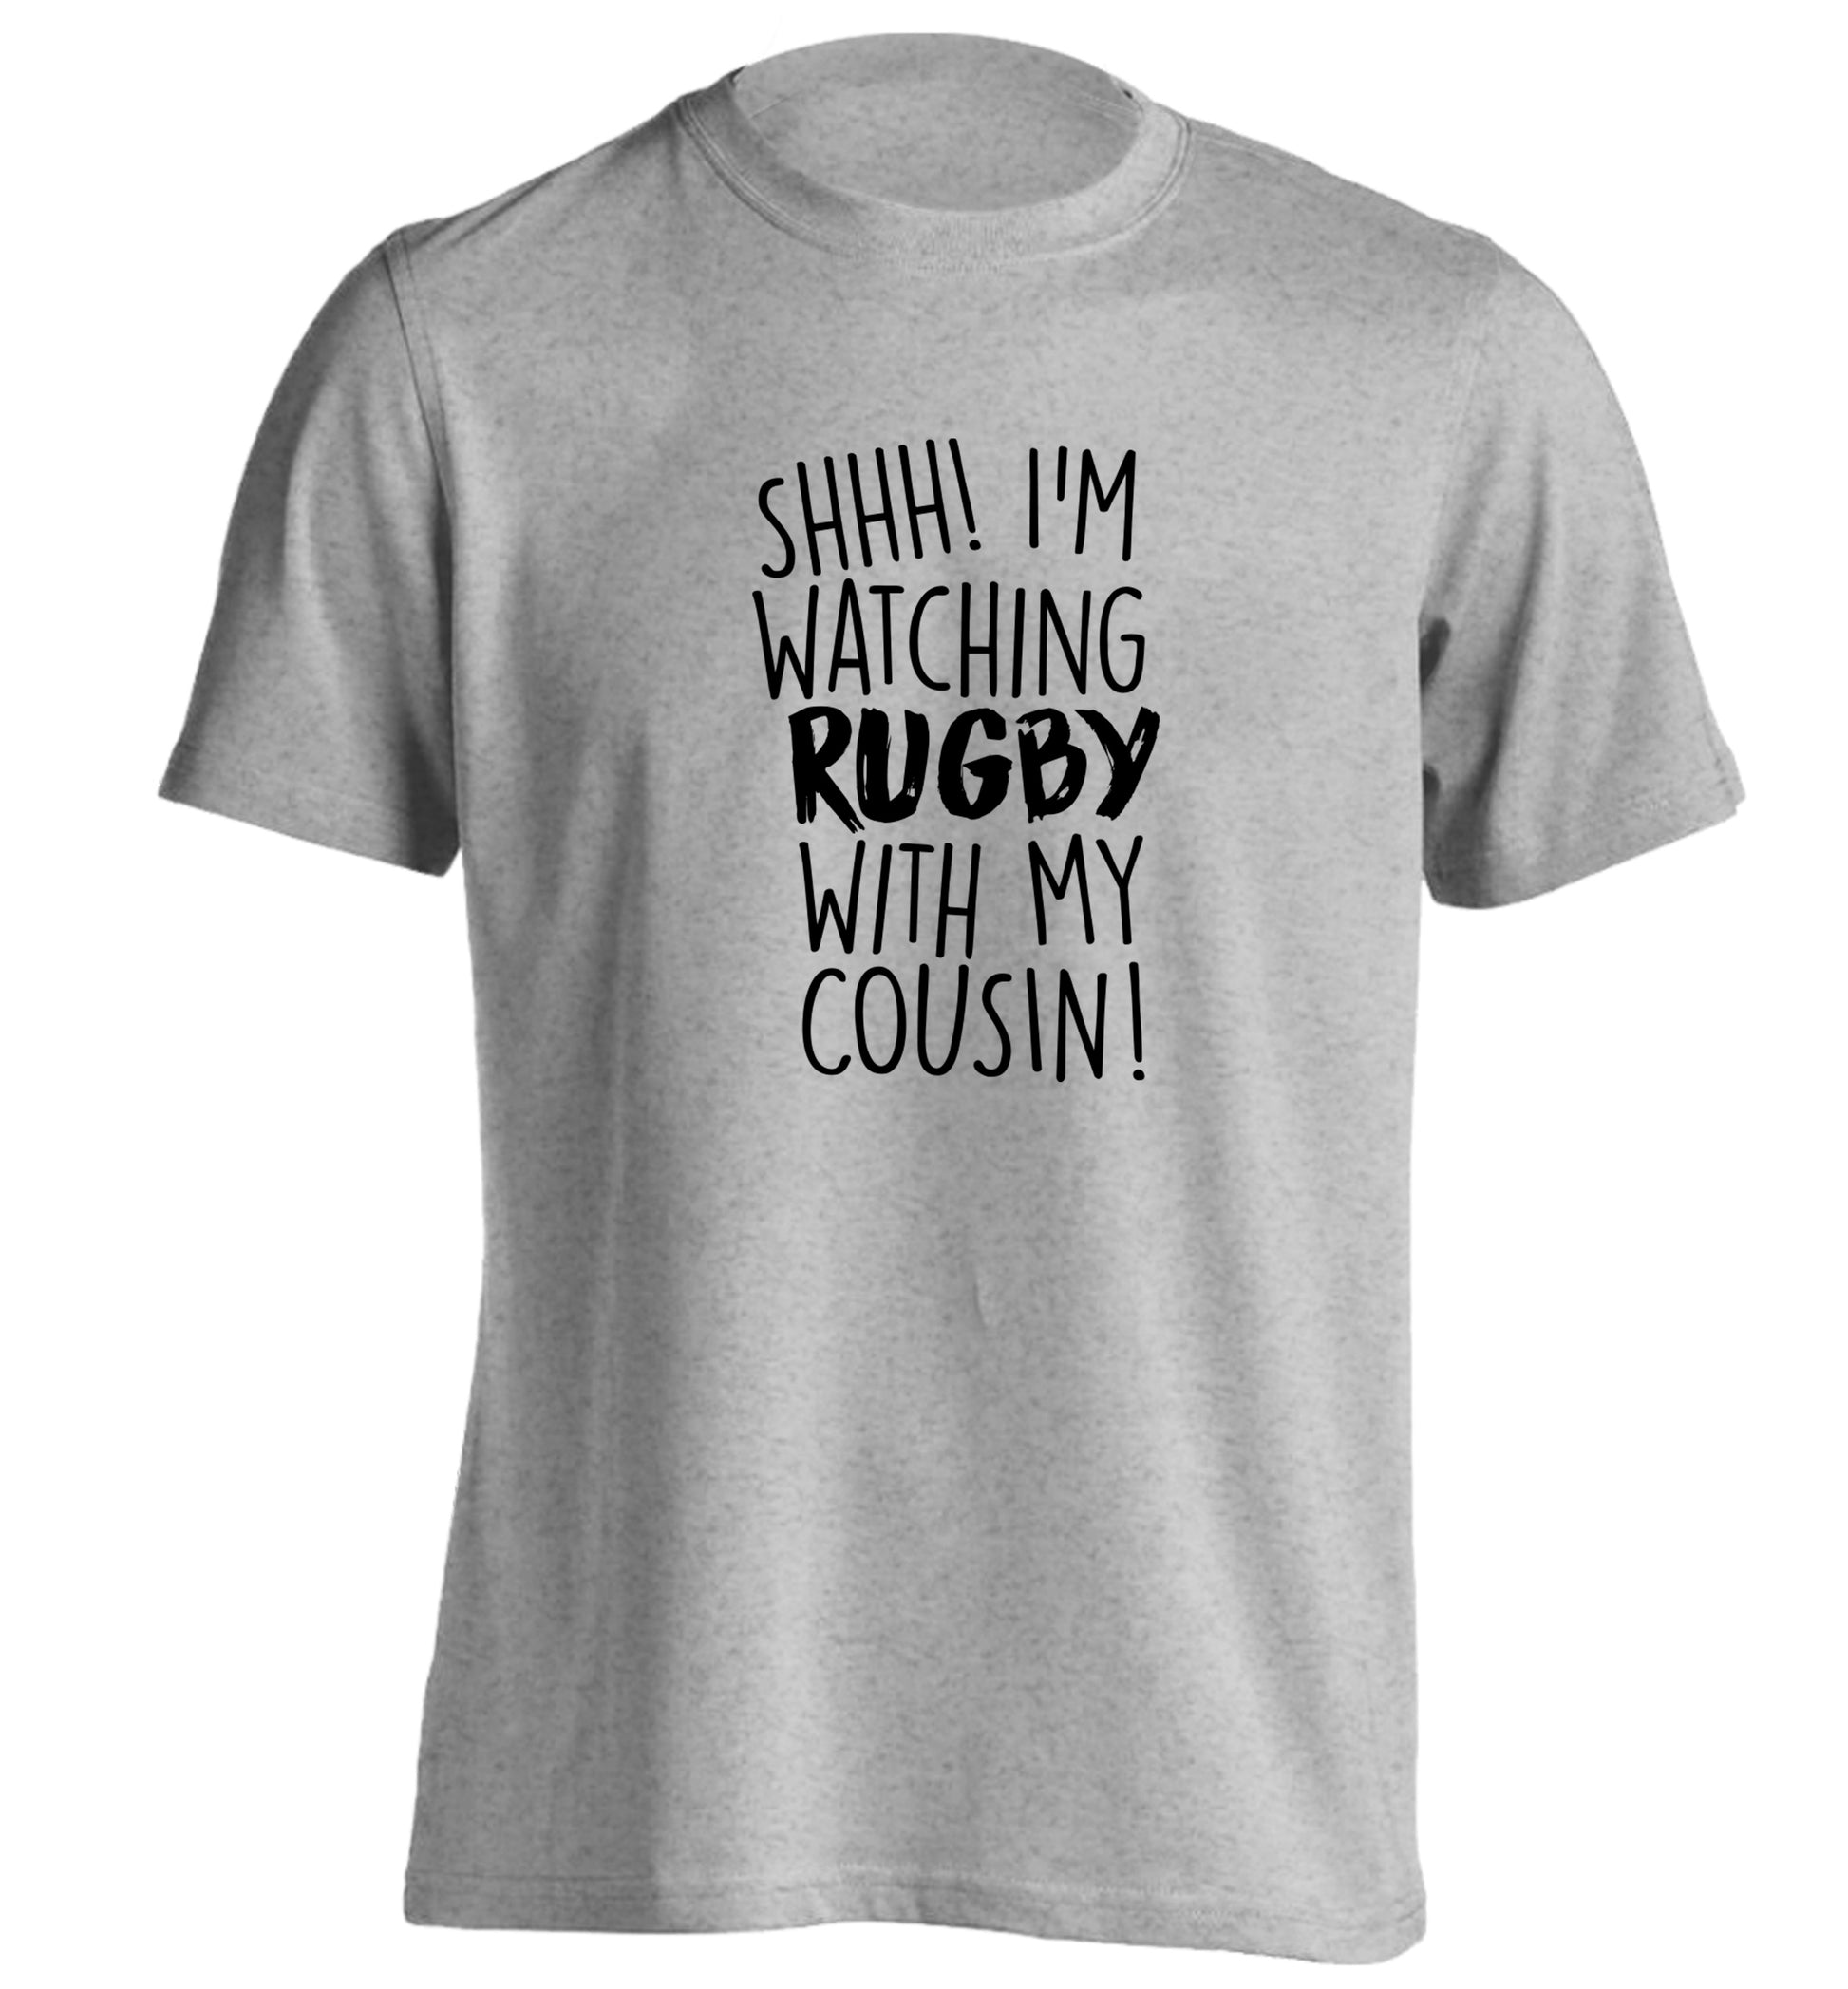 Shhh I'm watching rugby with my cousin adults unisex grey Tshirt 2XL